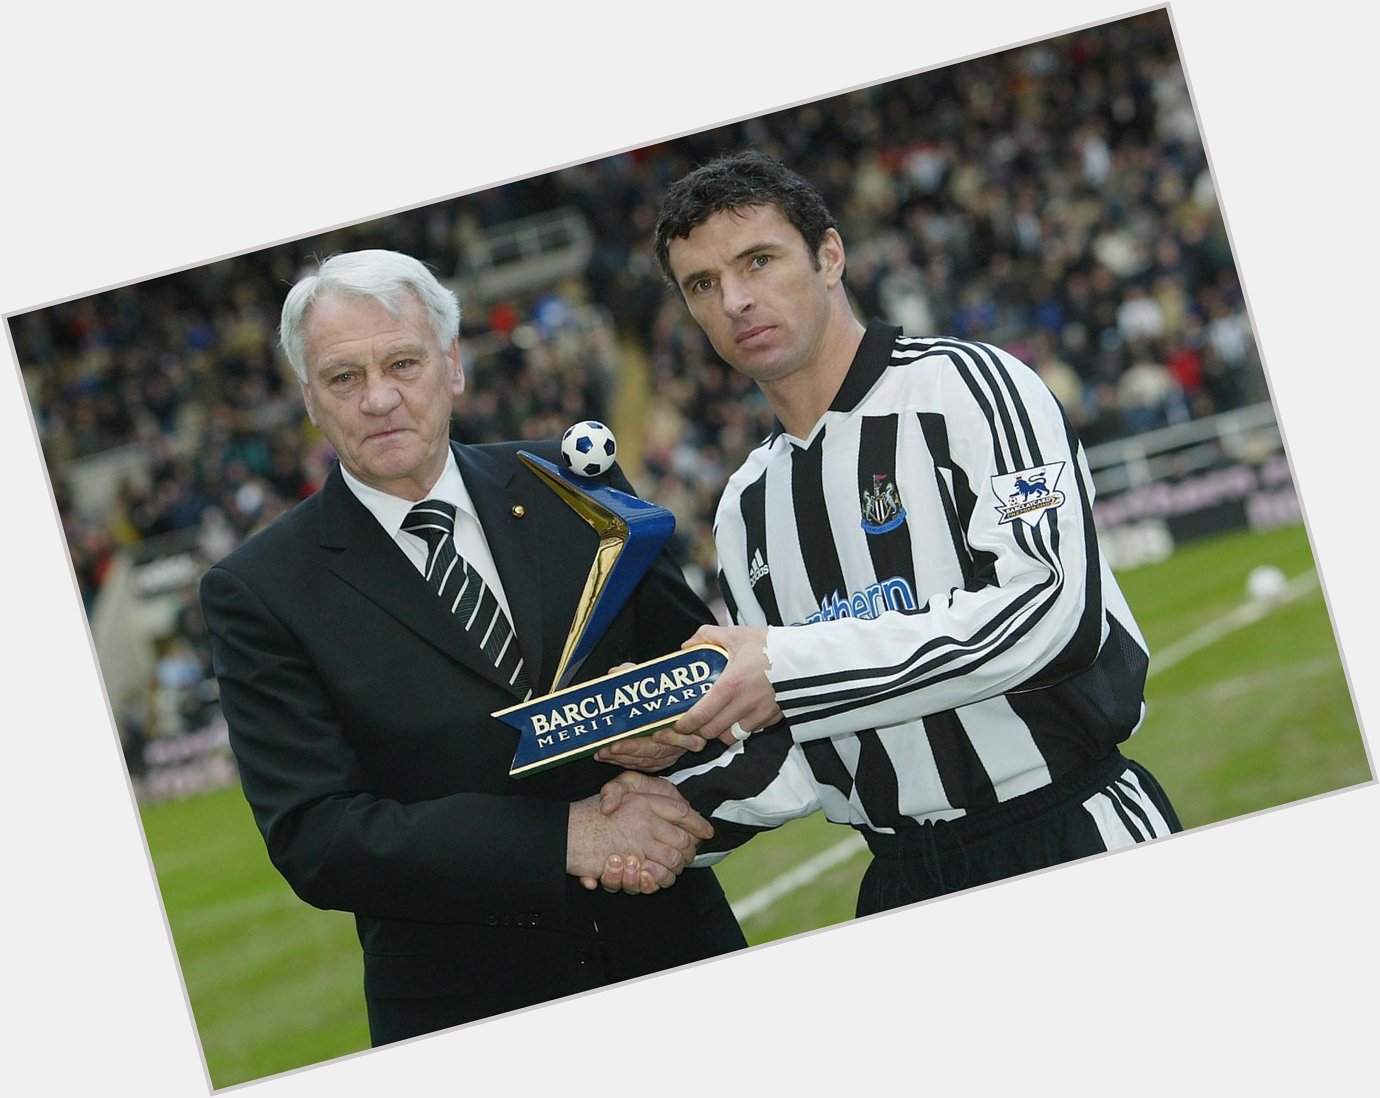 Happy 46th Birthday, Gary Speed. The world of football misses you dearly. 